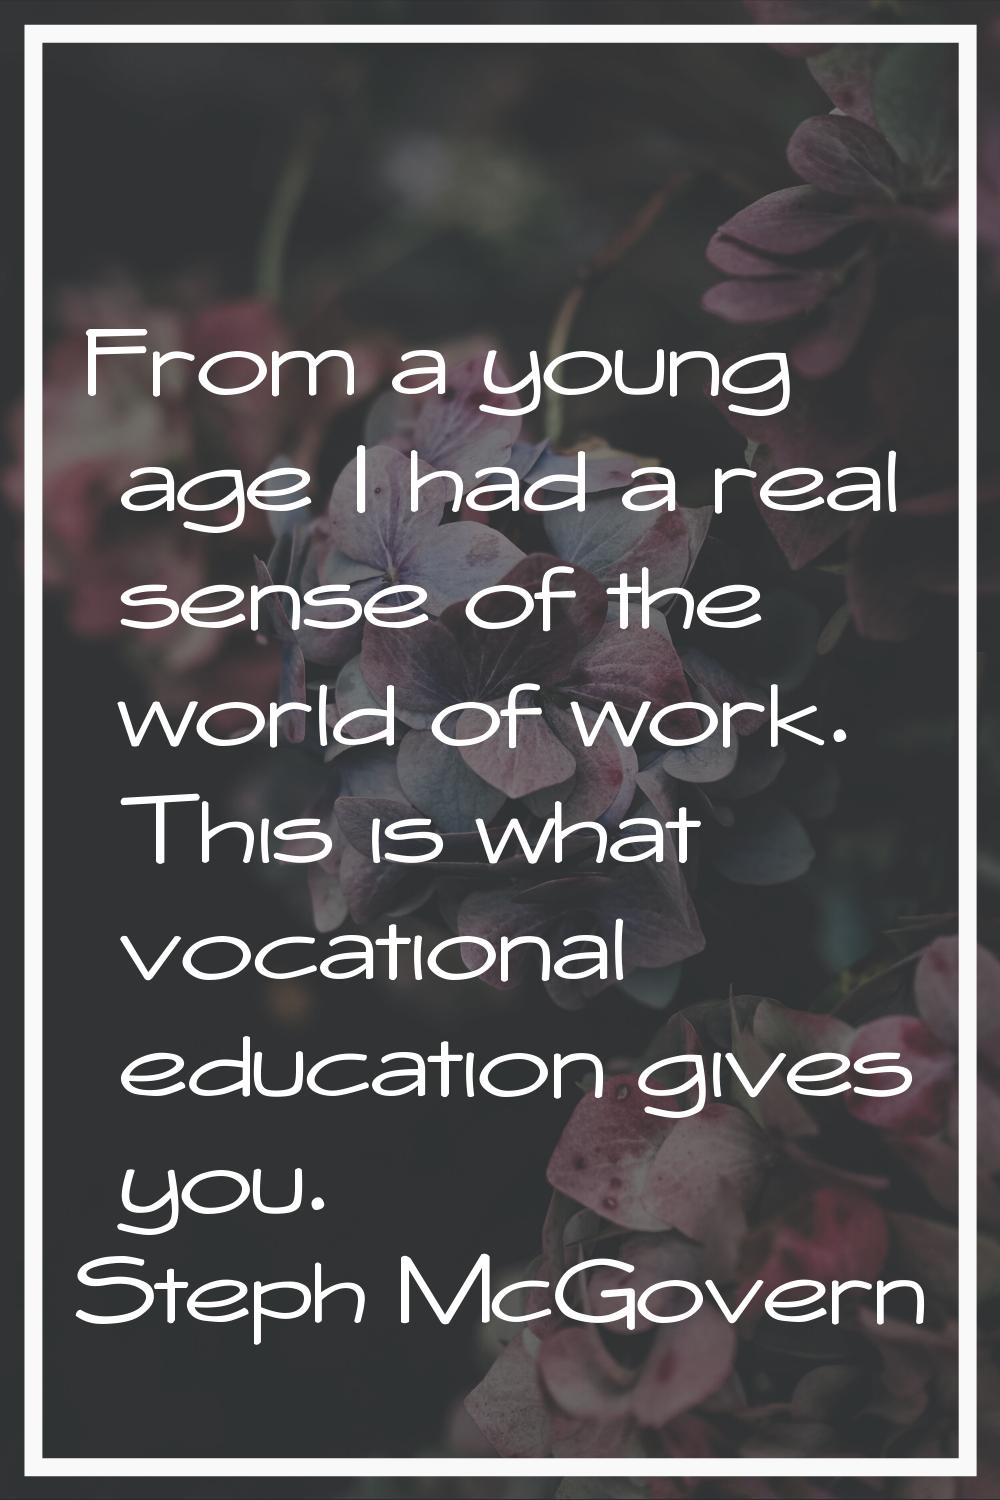 From a young age I had a real sense of the world of work. This is what vocational education gives y